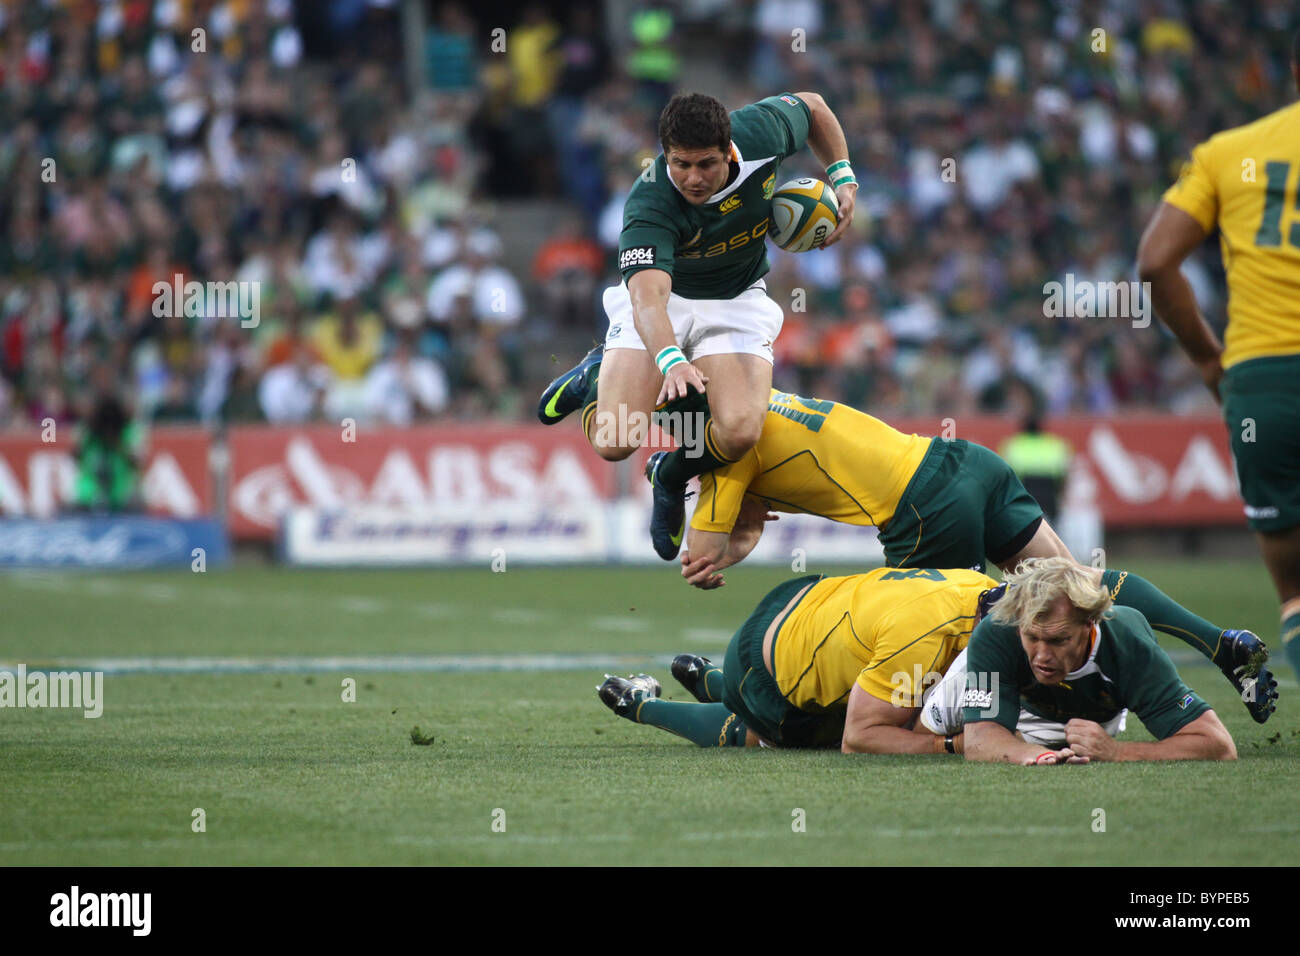 Morne Steyn Evades a tackle by going over the Australian defence Stock Photo